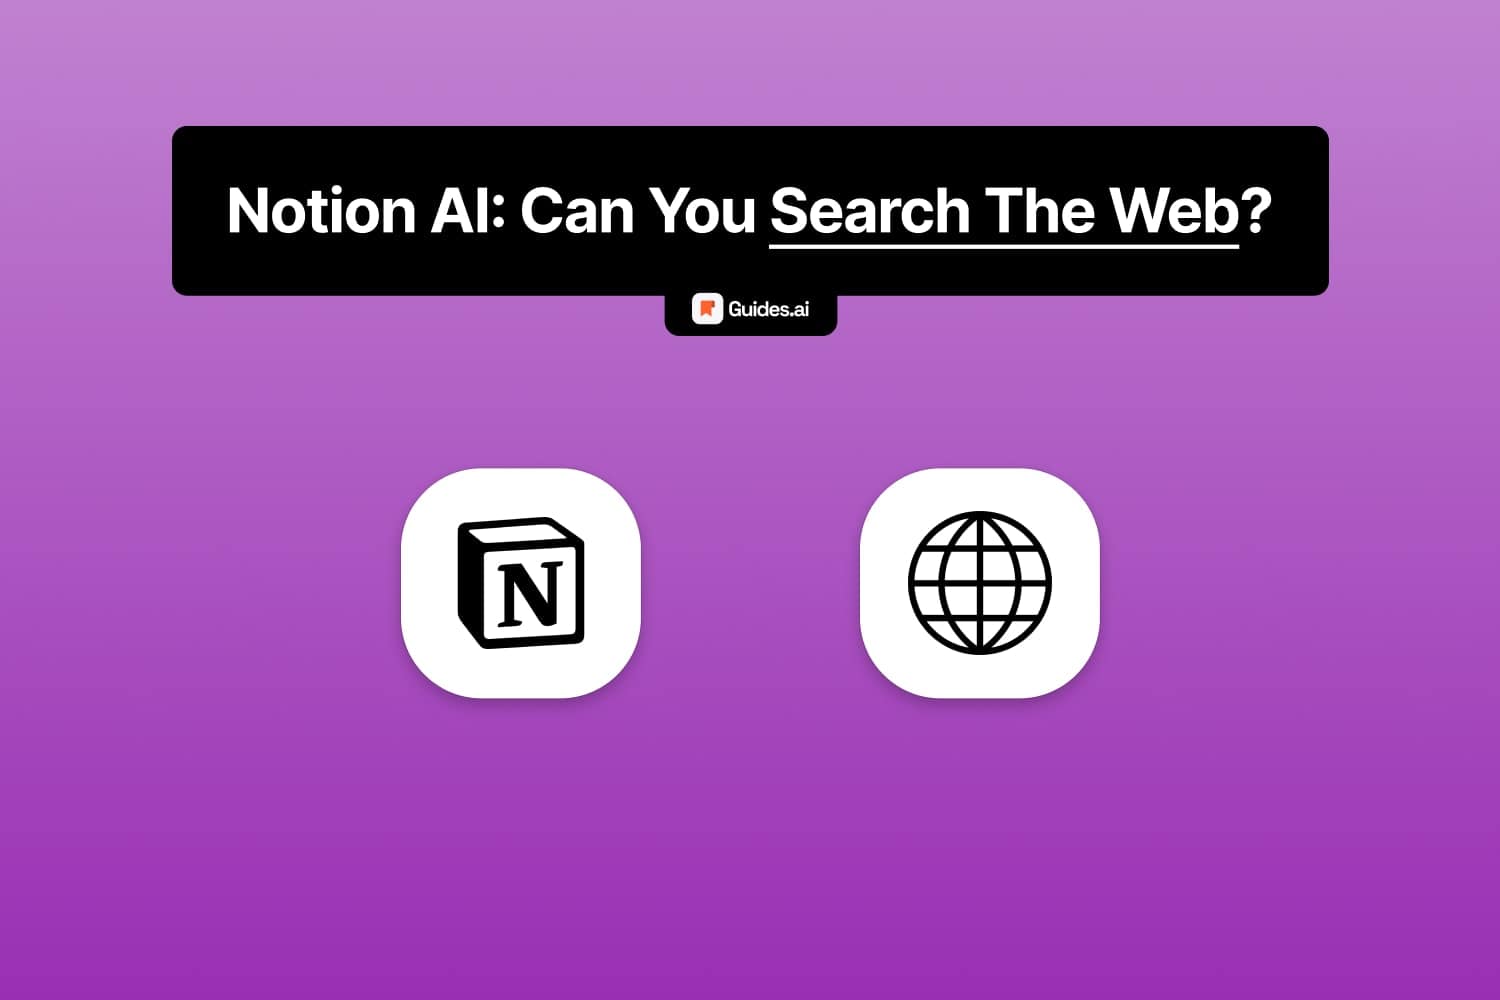 Notion AI cannot search the web